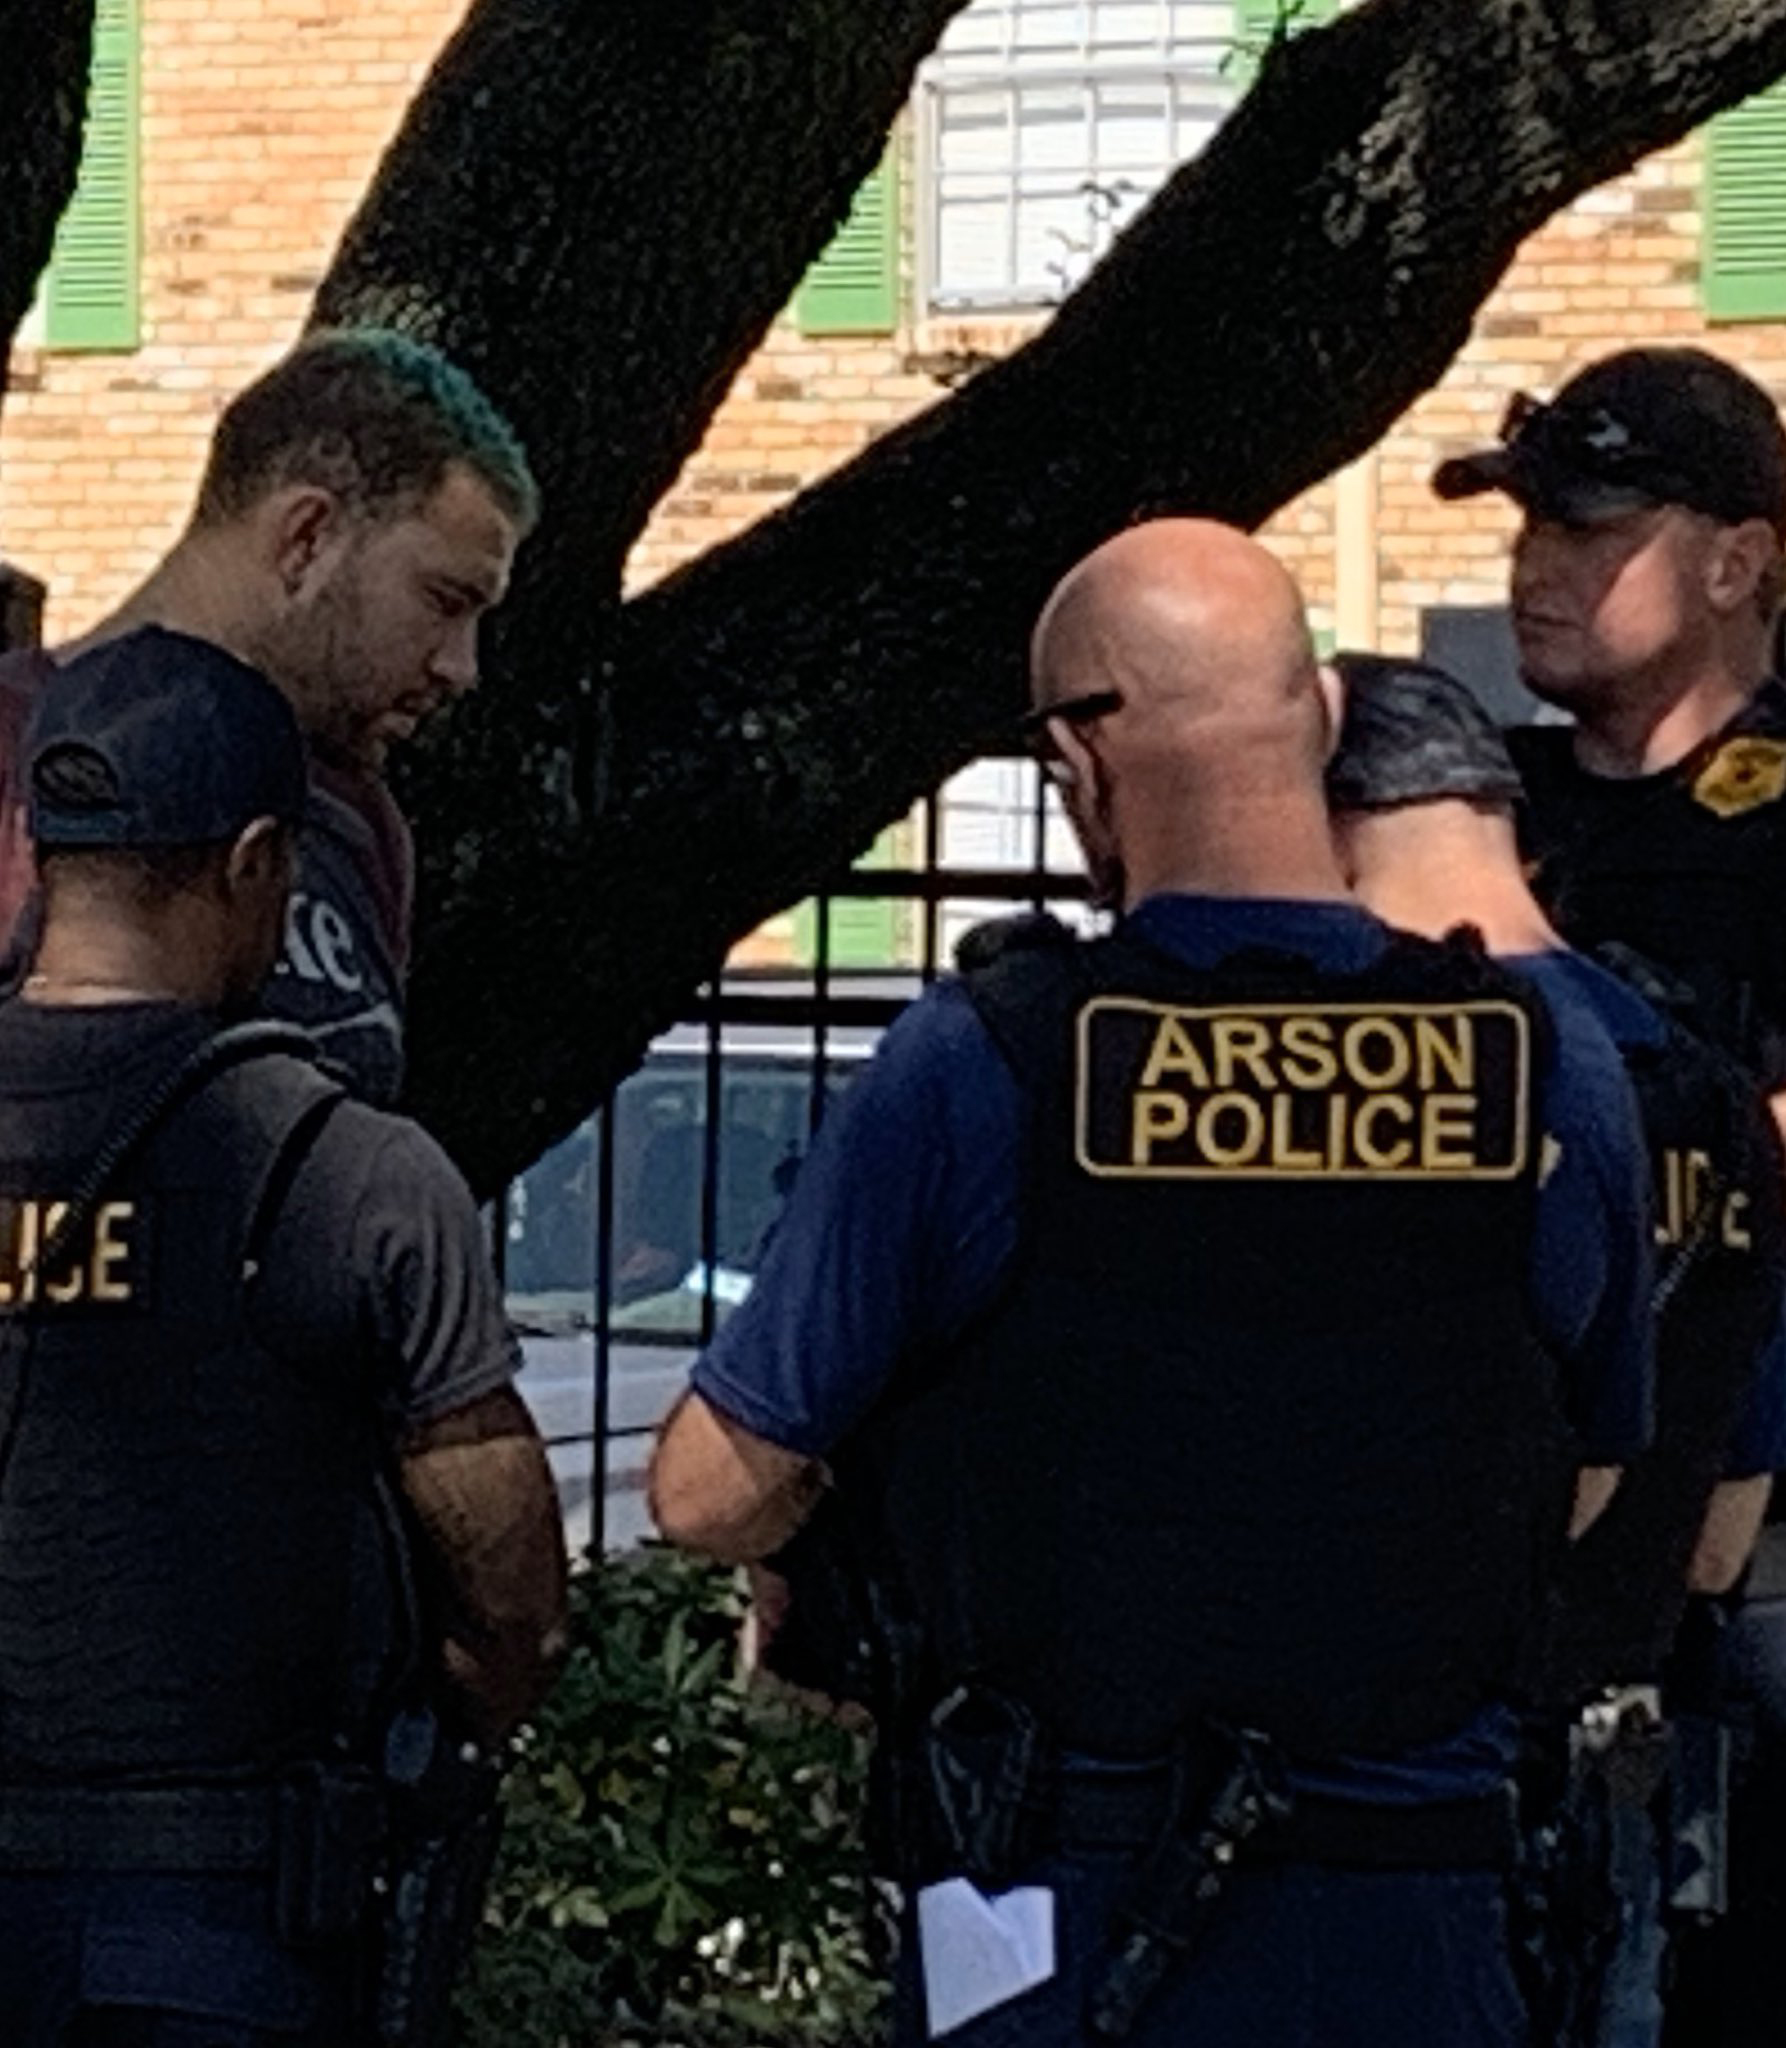 PHOTO: Joshua A. Rauch, 28, pictured here with green hair is arrested on Oct. 10, 2020, by police and arson investigators in Houston on suspicion of setting a series of fires that terrorized a neighborhood.